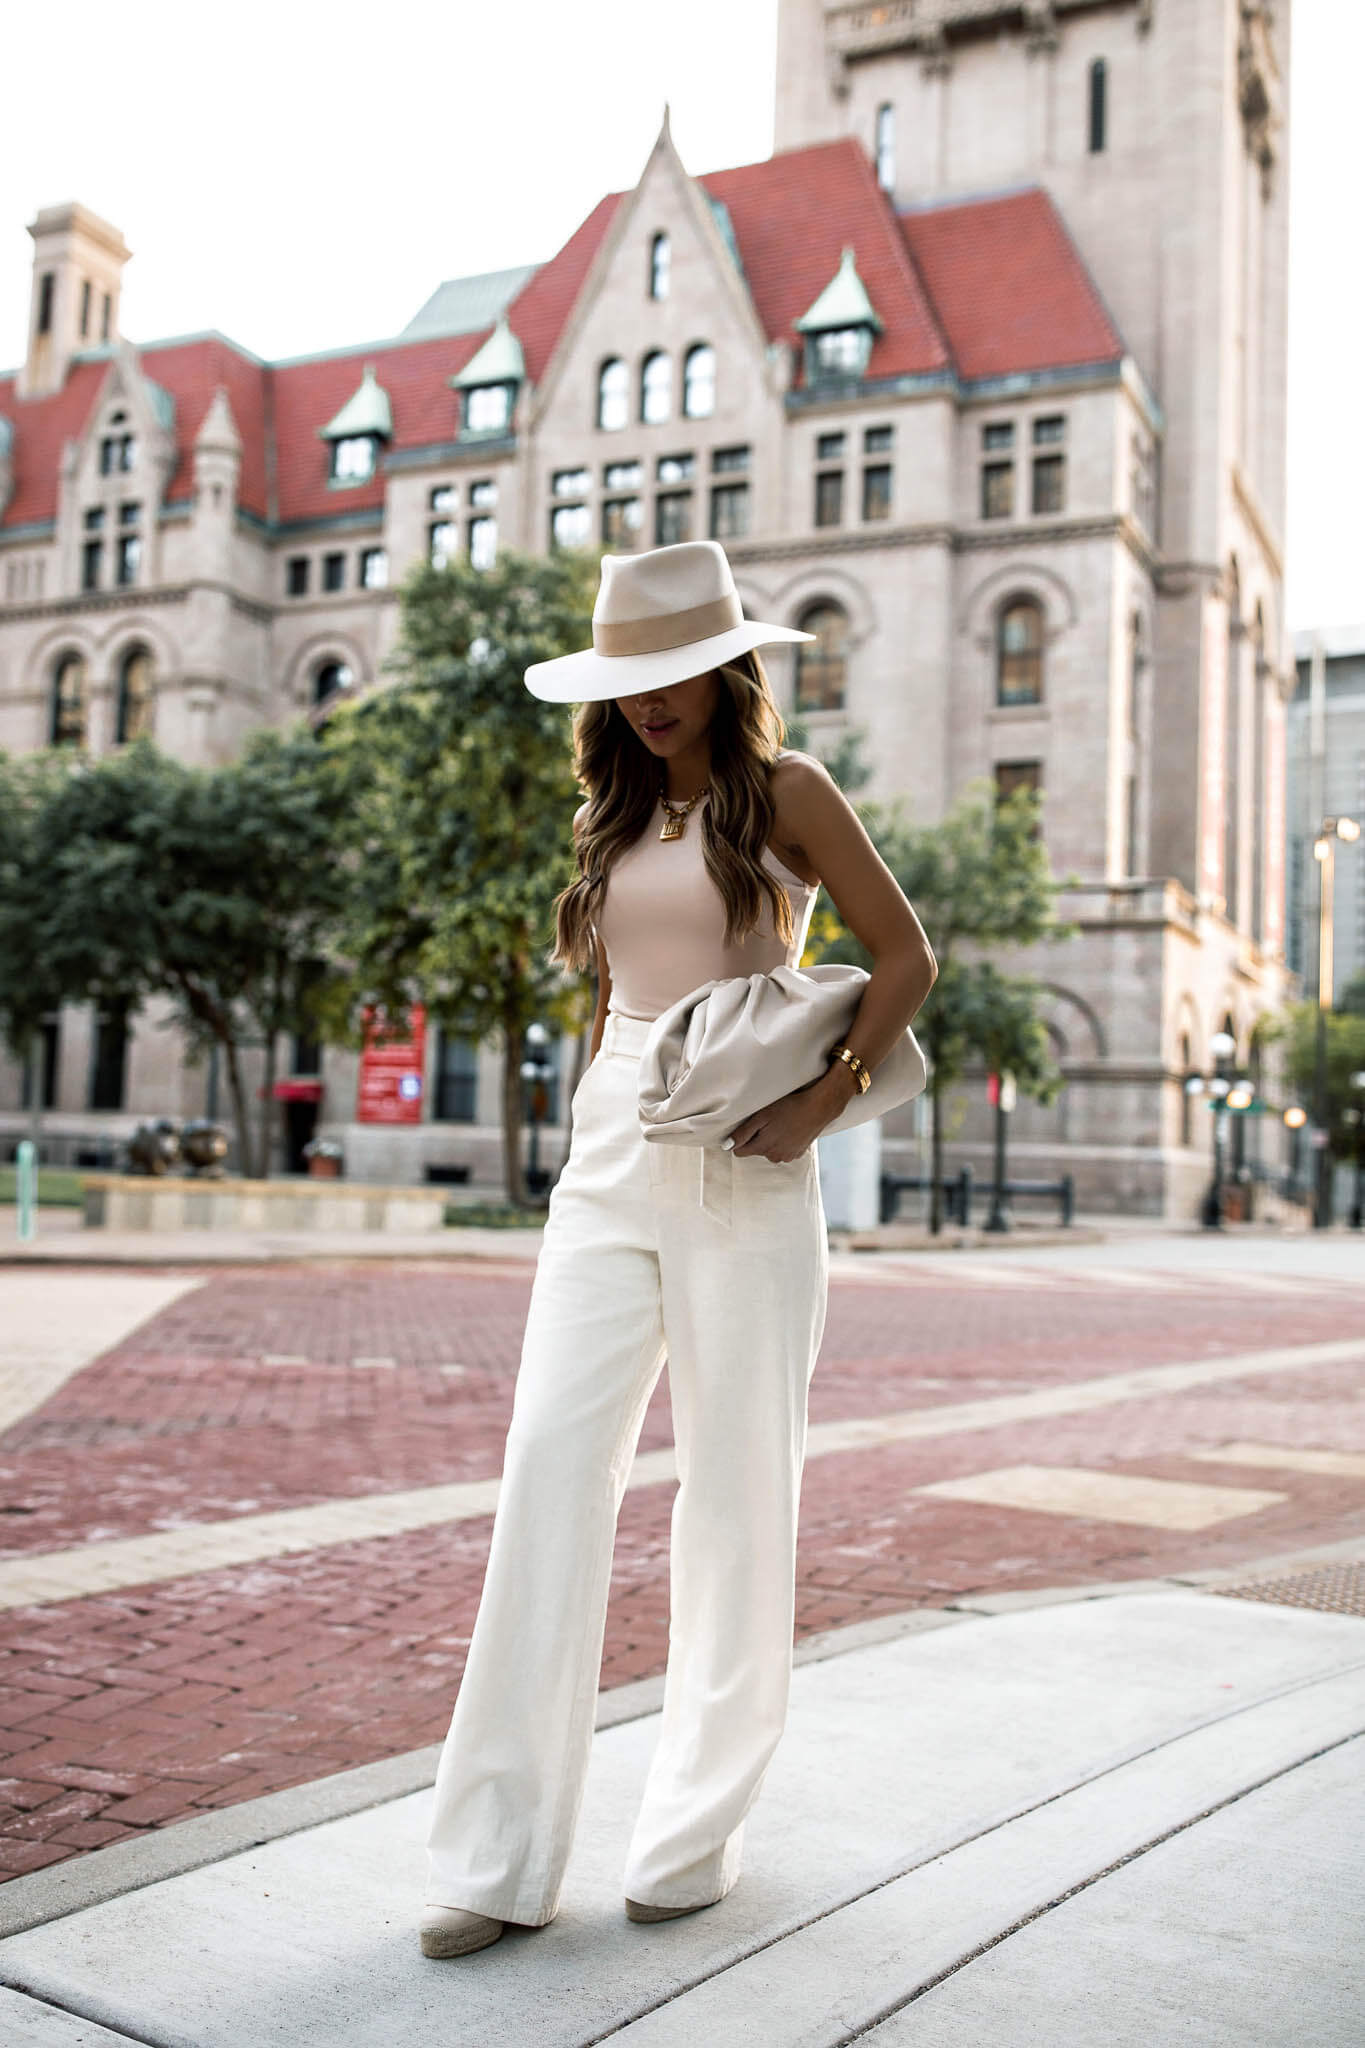 fashion blogger mia mia mine wearing white linen pants and a janessa leone hat for summer 2020